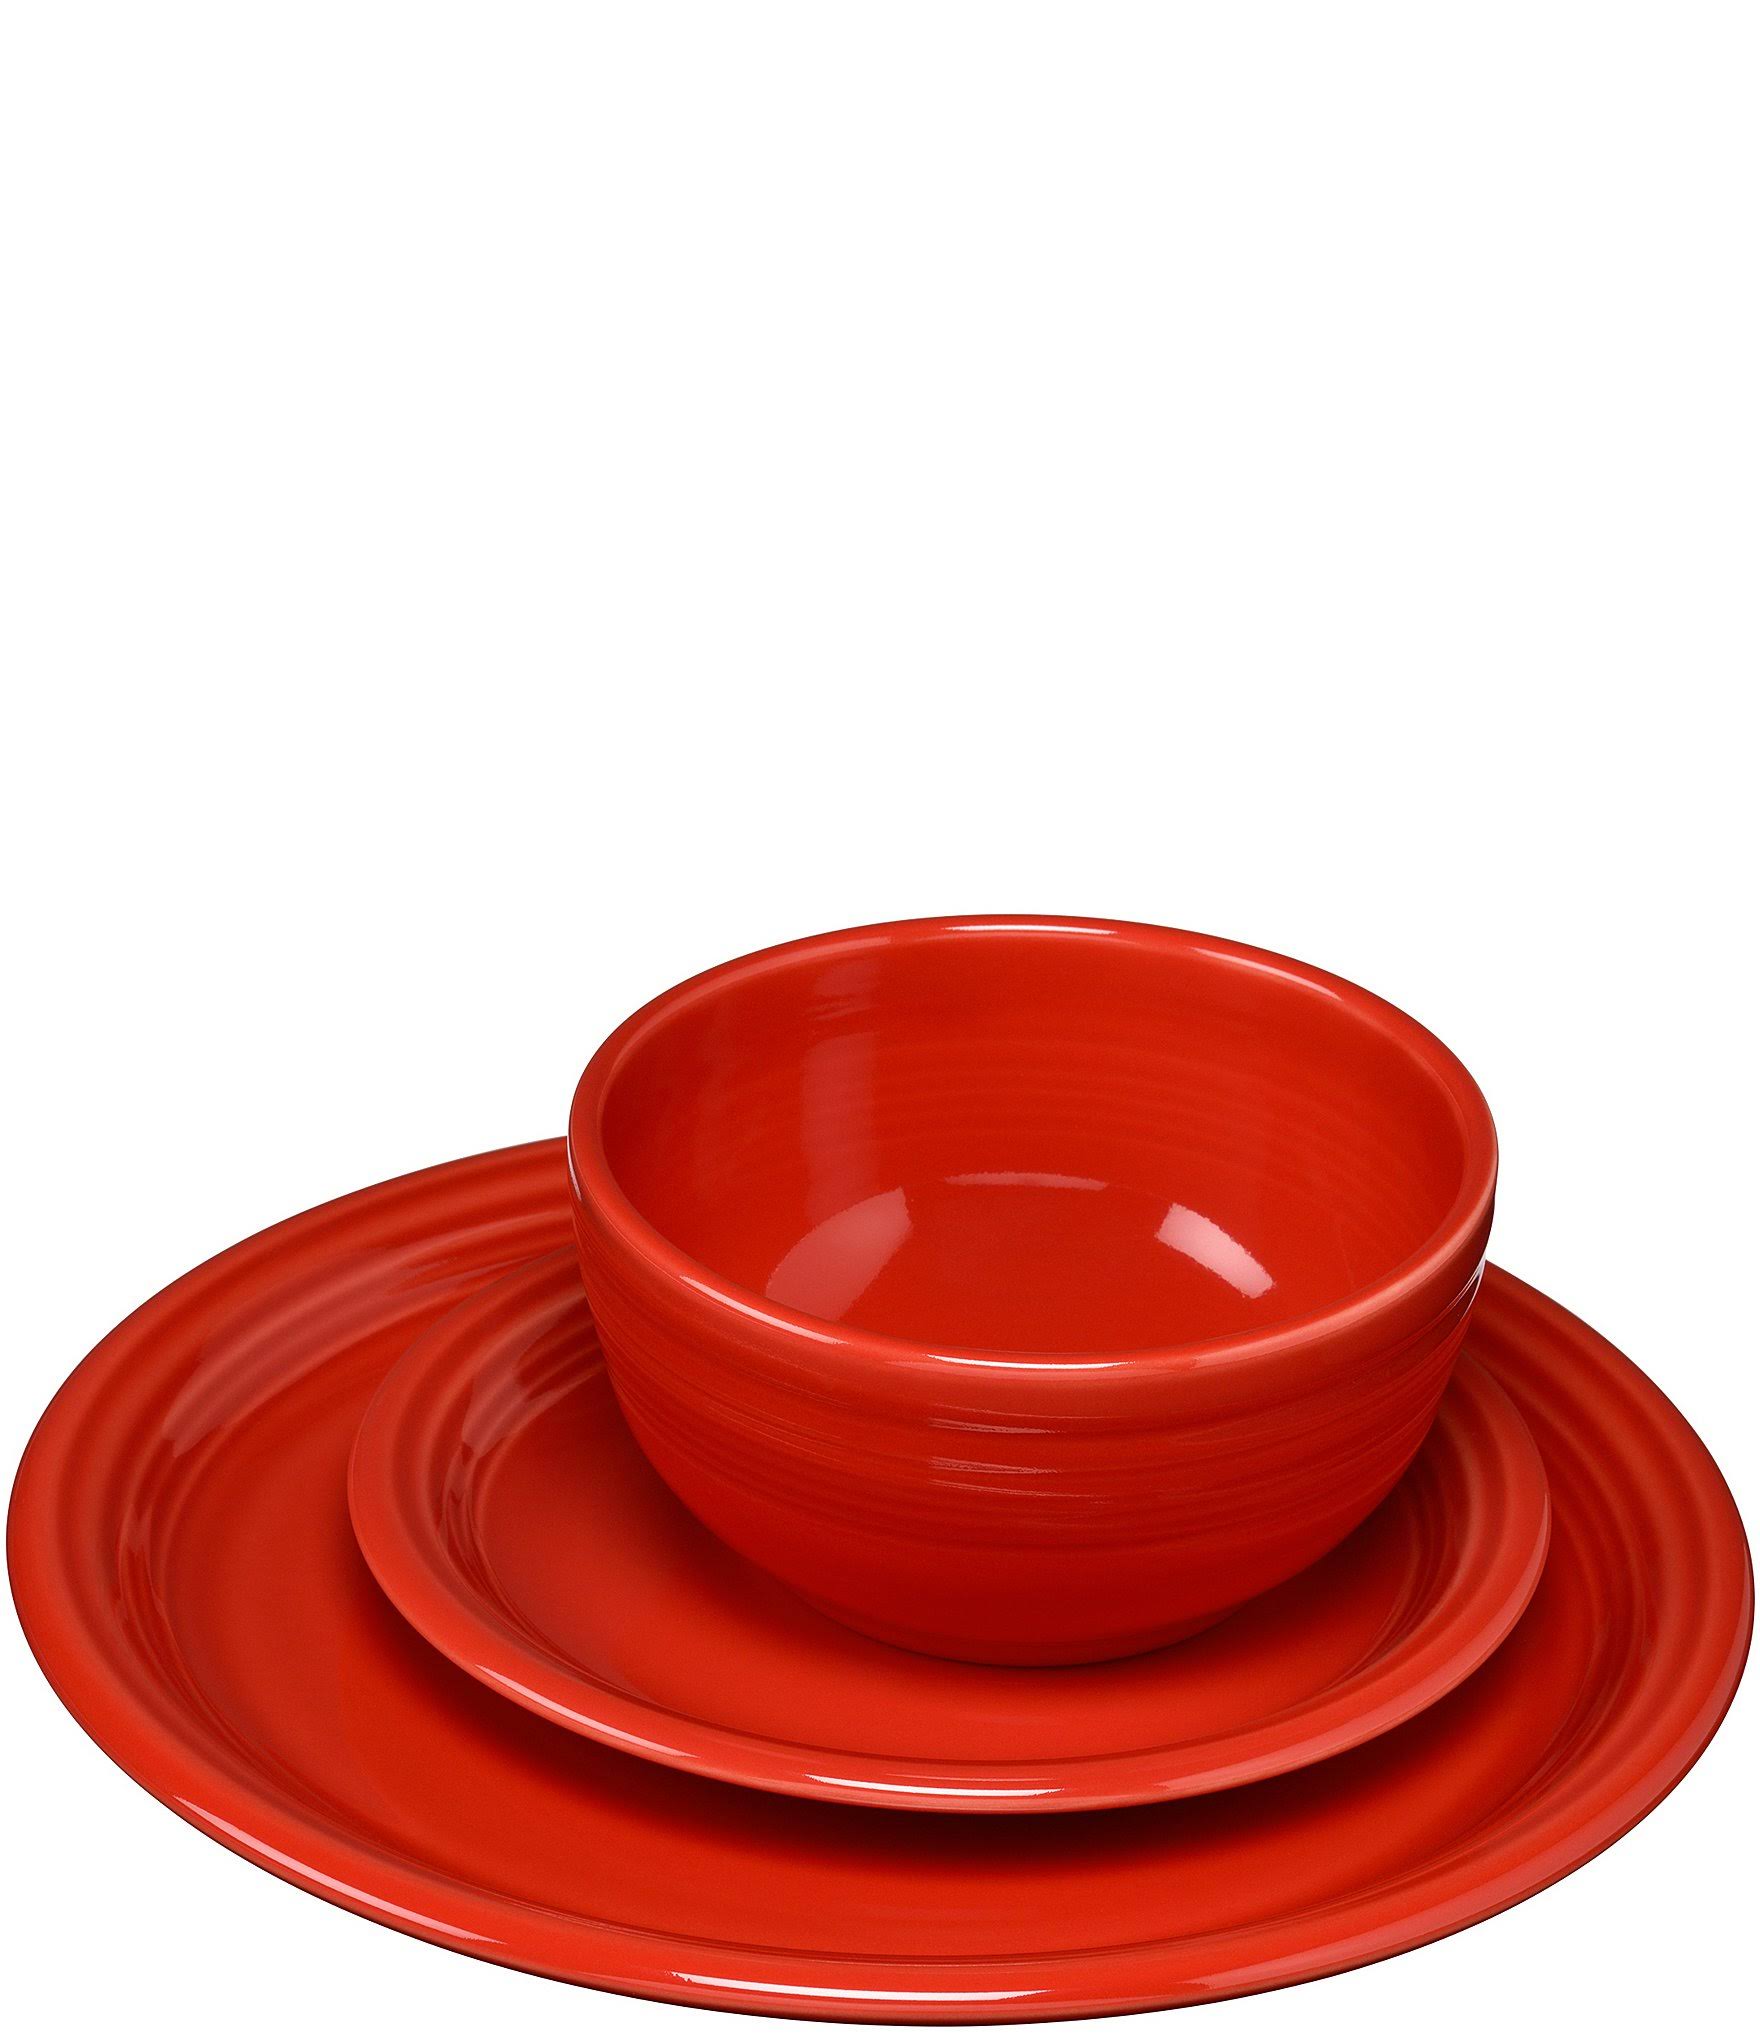 Nora Fleming Chip and Dip Melamine